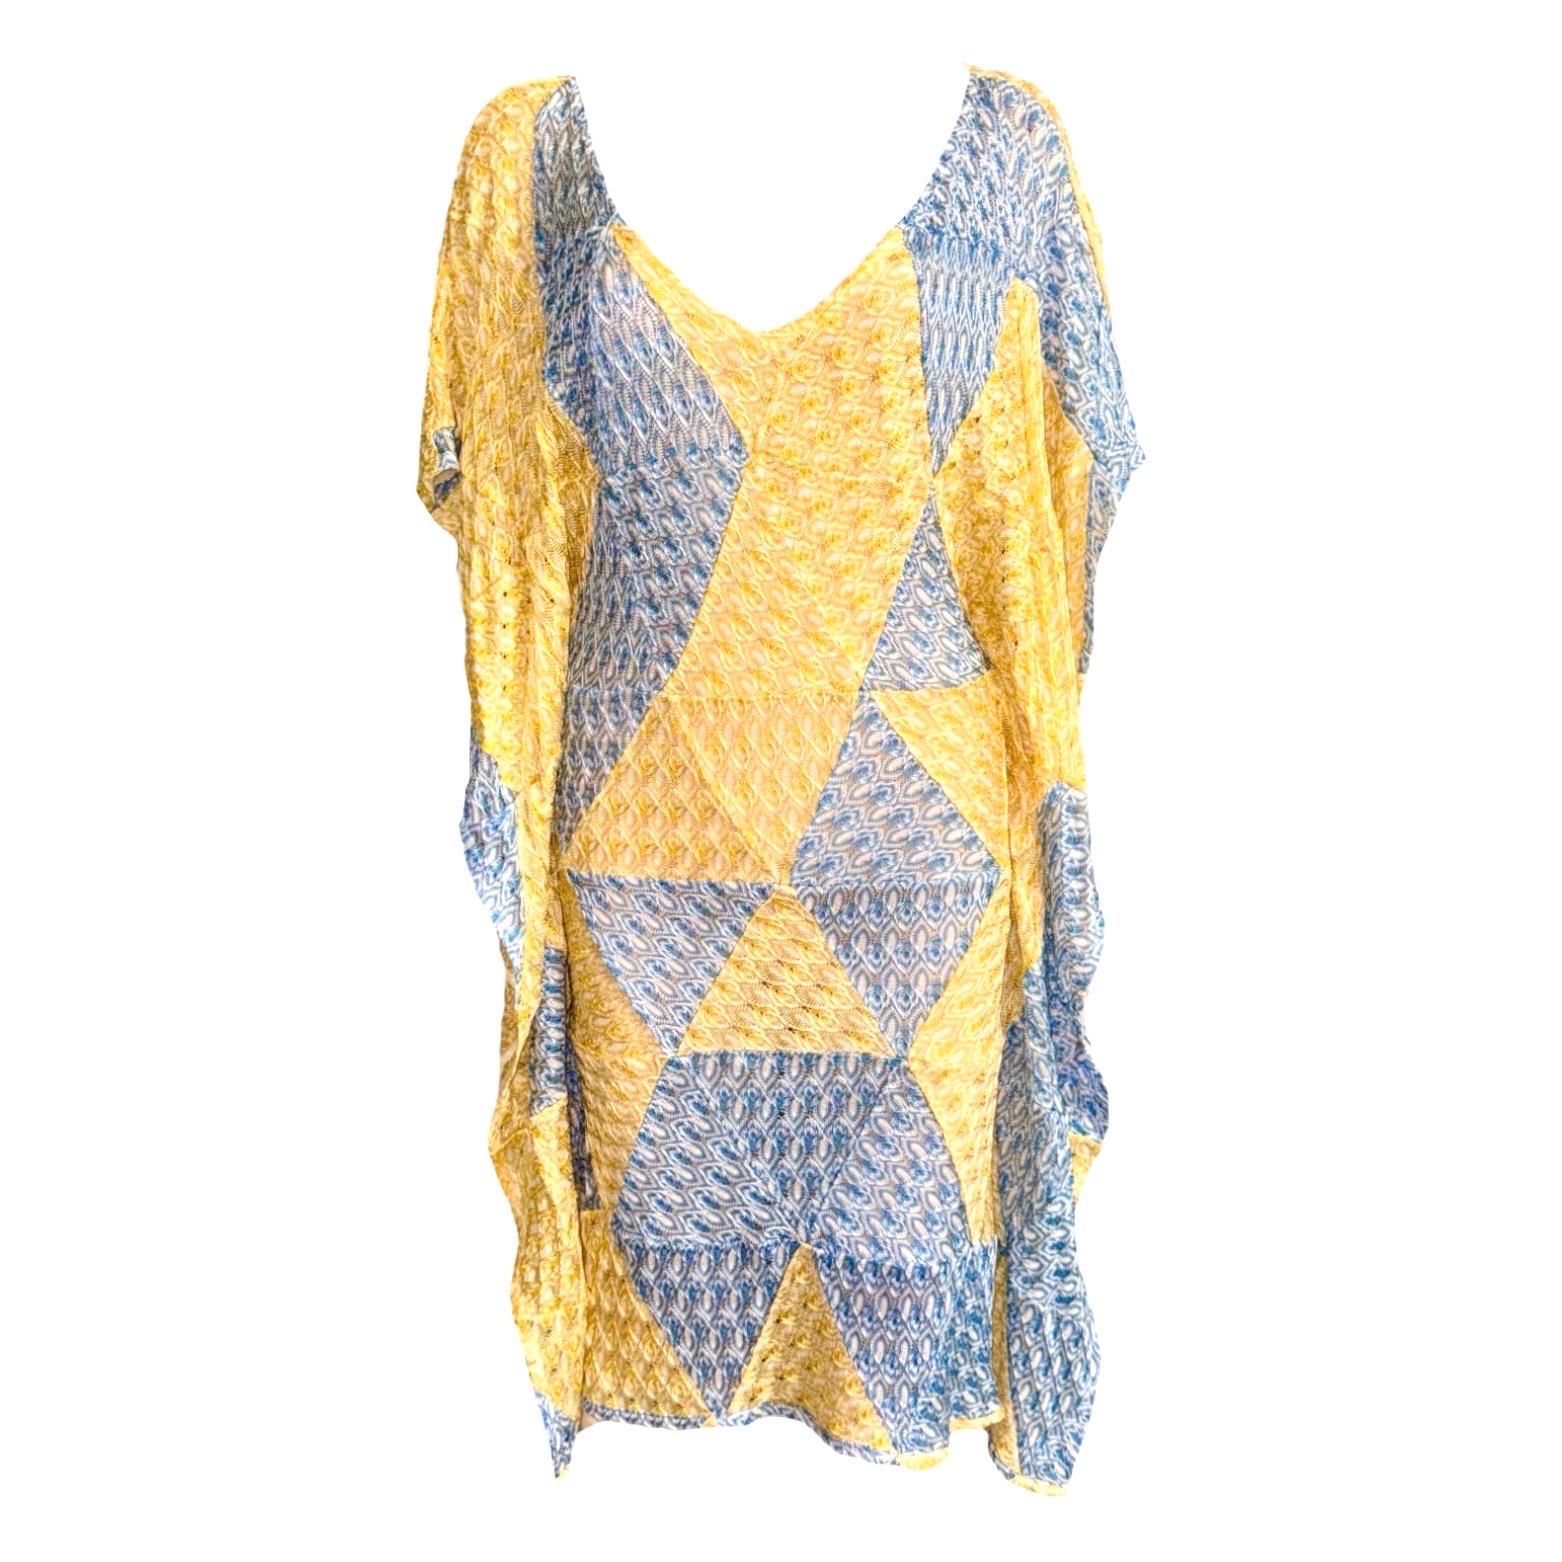 Missoni's signature crochet-knit kaftans are a vacation staple. Yellow and blue tones make this dress style perfect for sun-soaked beach resorts.

Stunning MISSONI kaftan dress 
Fantastic blue & yellow colors
Great trimming 
MISSONI signature zigzag